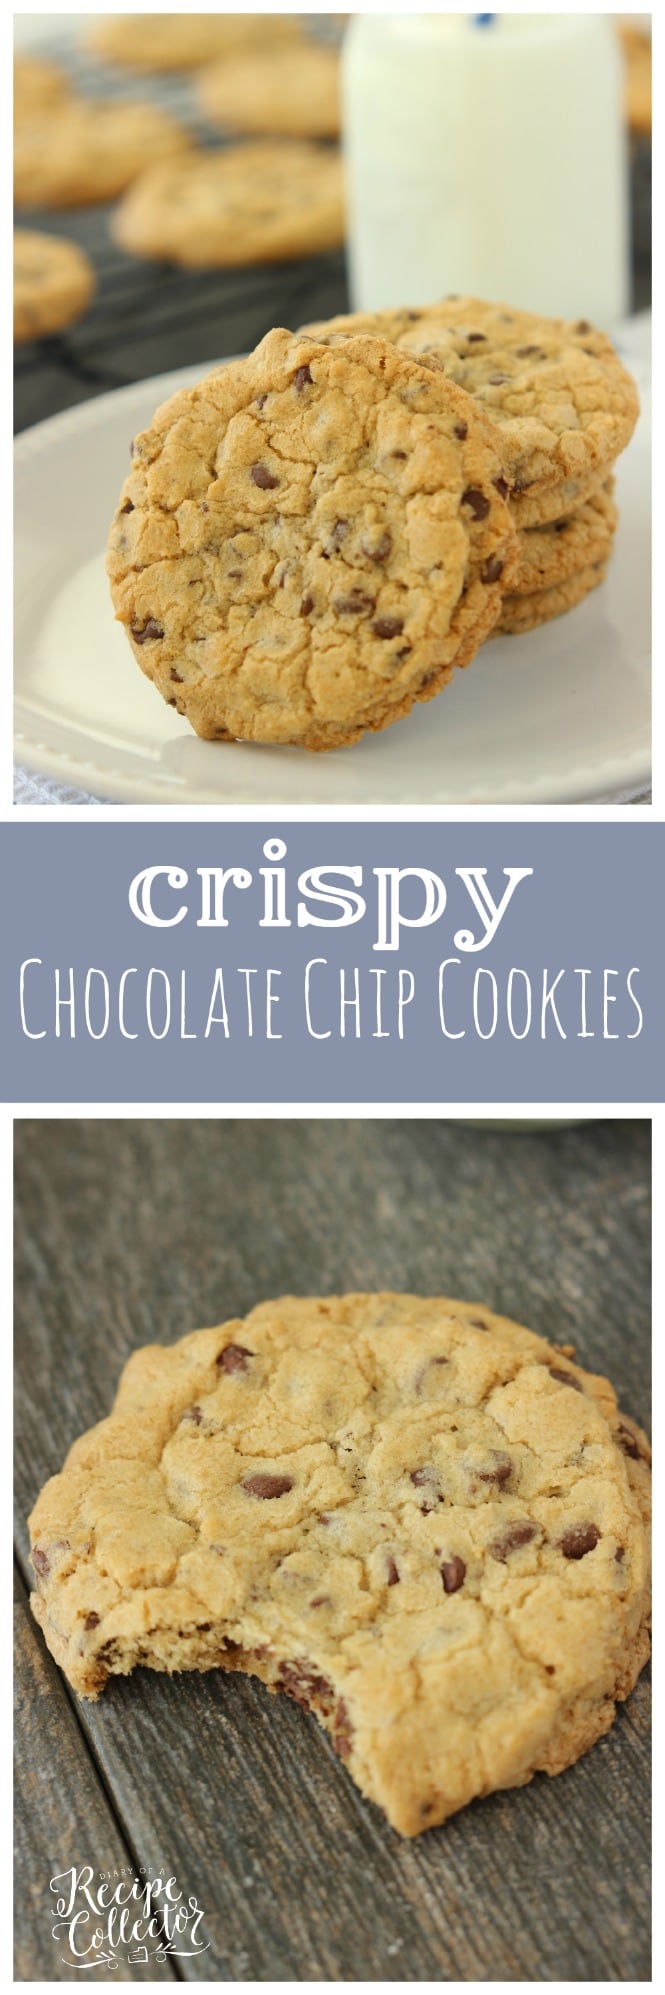 Crispy Chocolate Chip Cookies - The perfect crispy yet chewy cookie that is super quick and easy to make with no chilling of dough required!